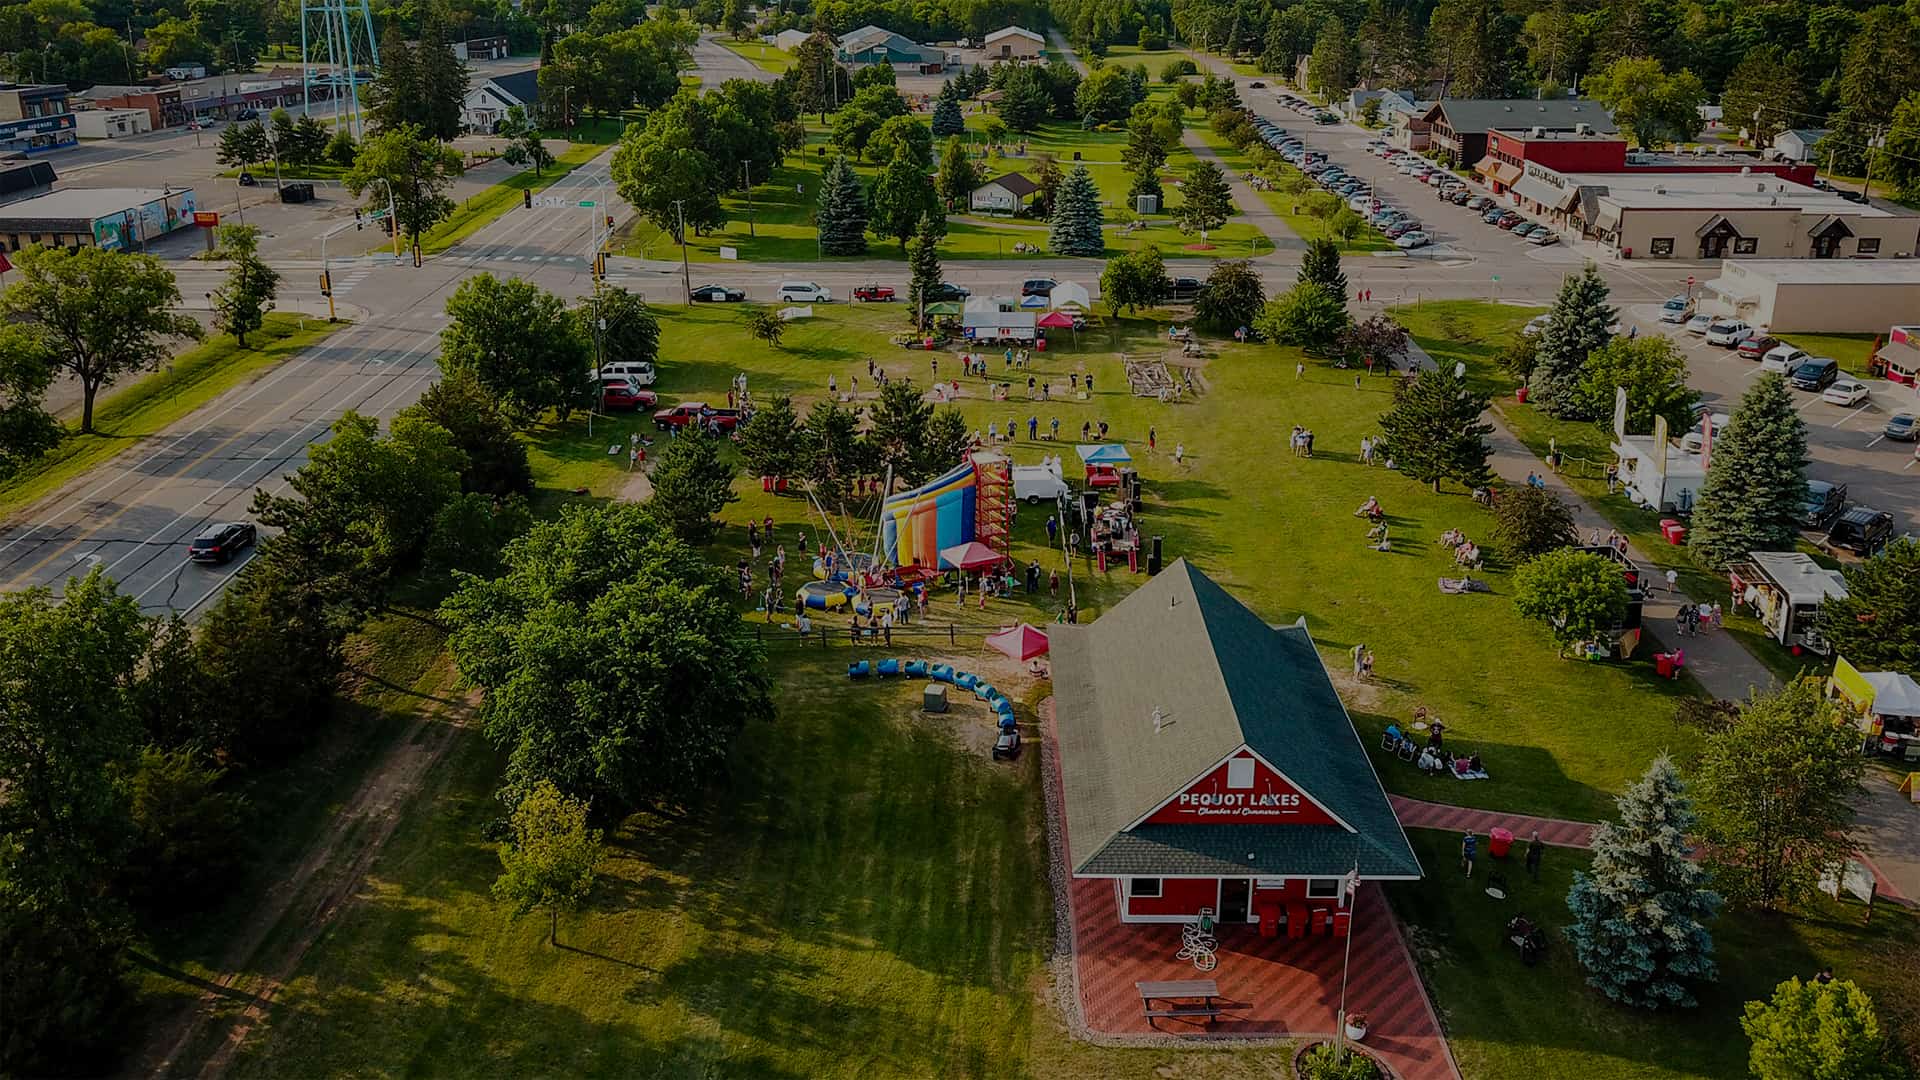 1920x1080 Aerial Photo of Pequot Lakes Park in the summer during a carnival